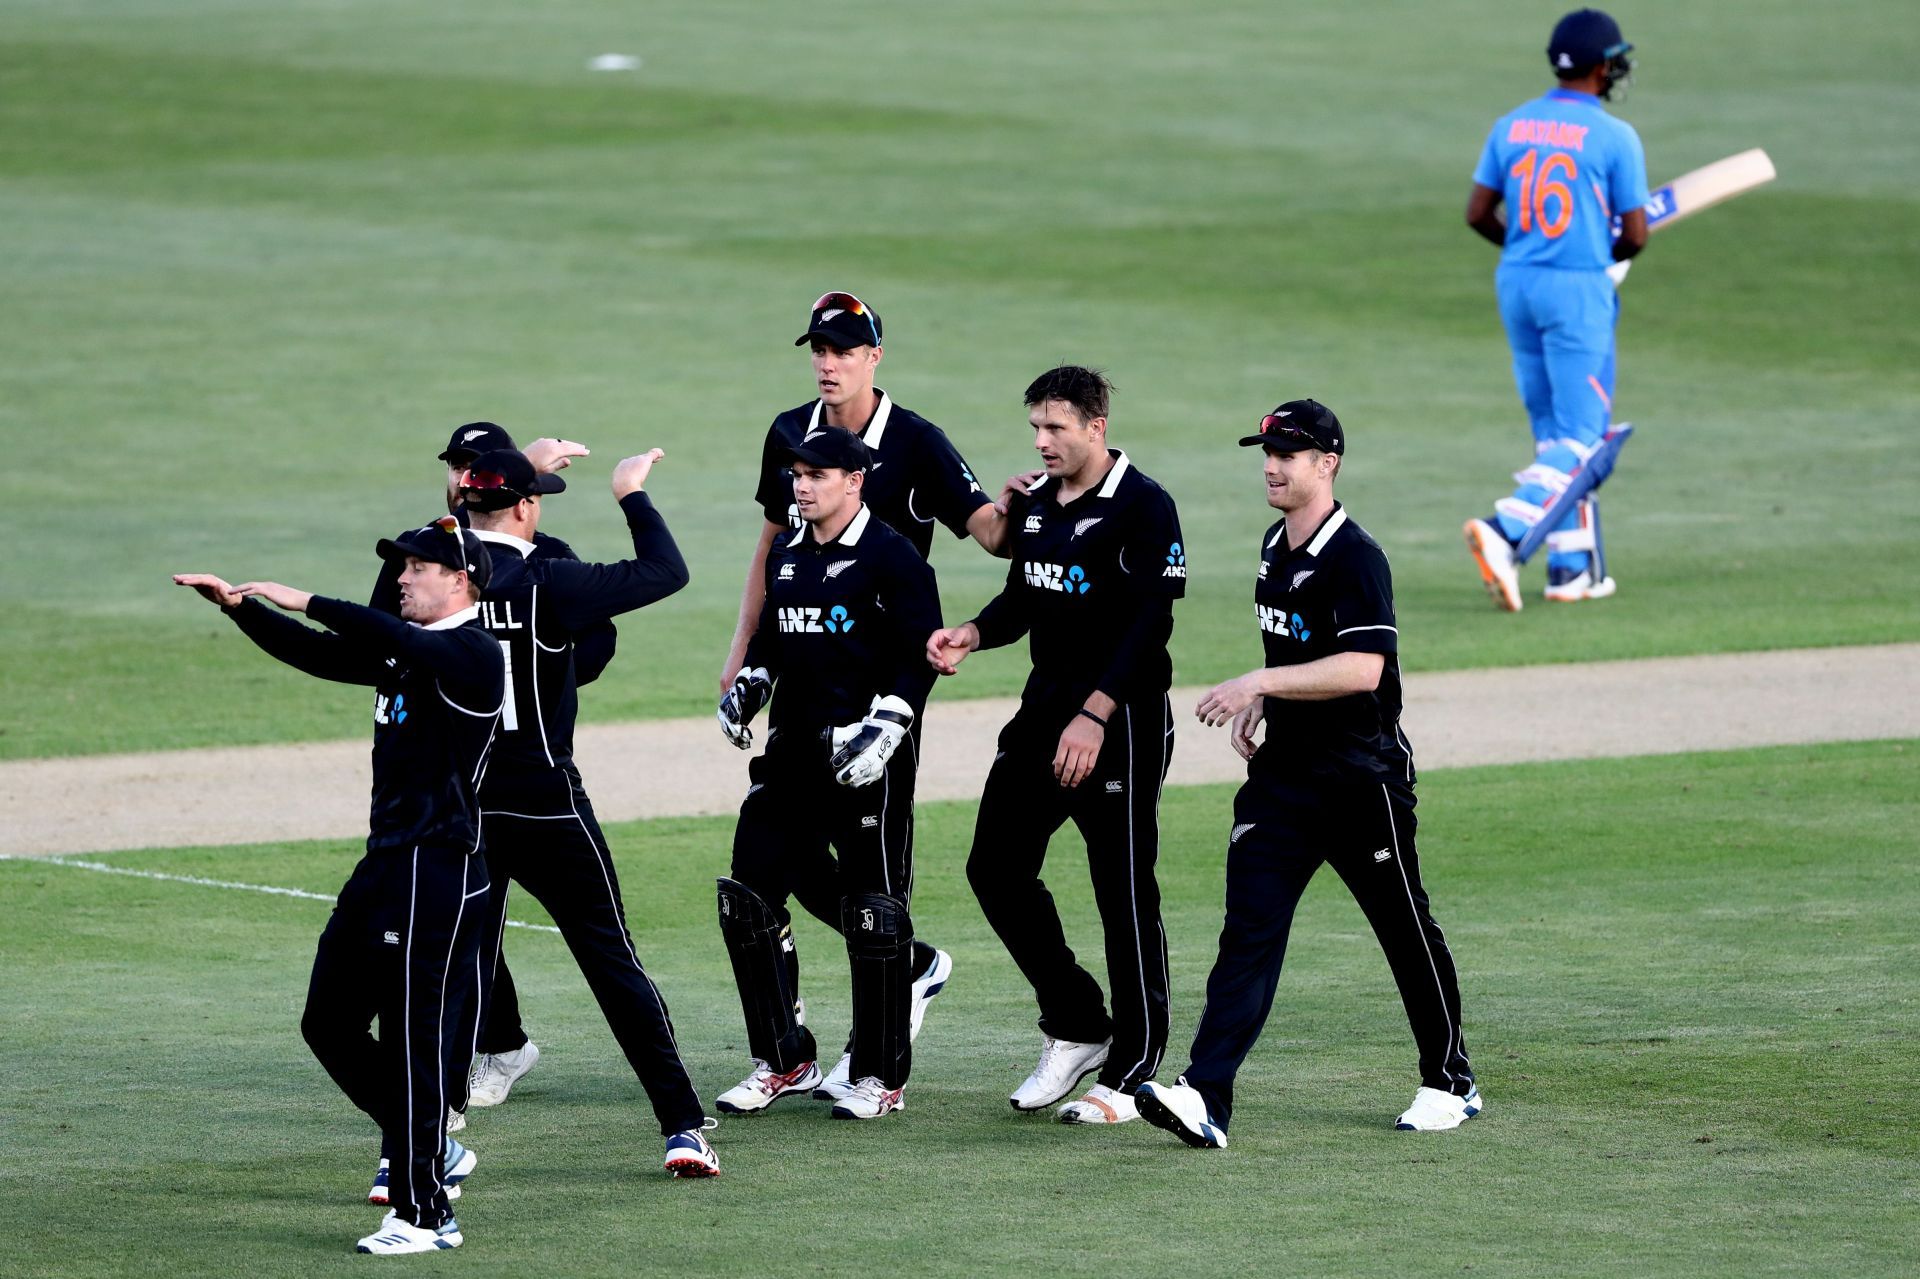 New Zealand v India - ODI: Game 2 [Pic Credit: Getty Images]